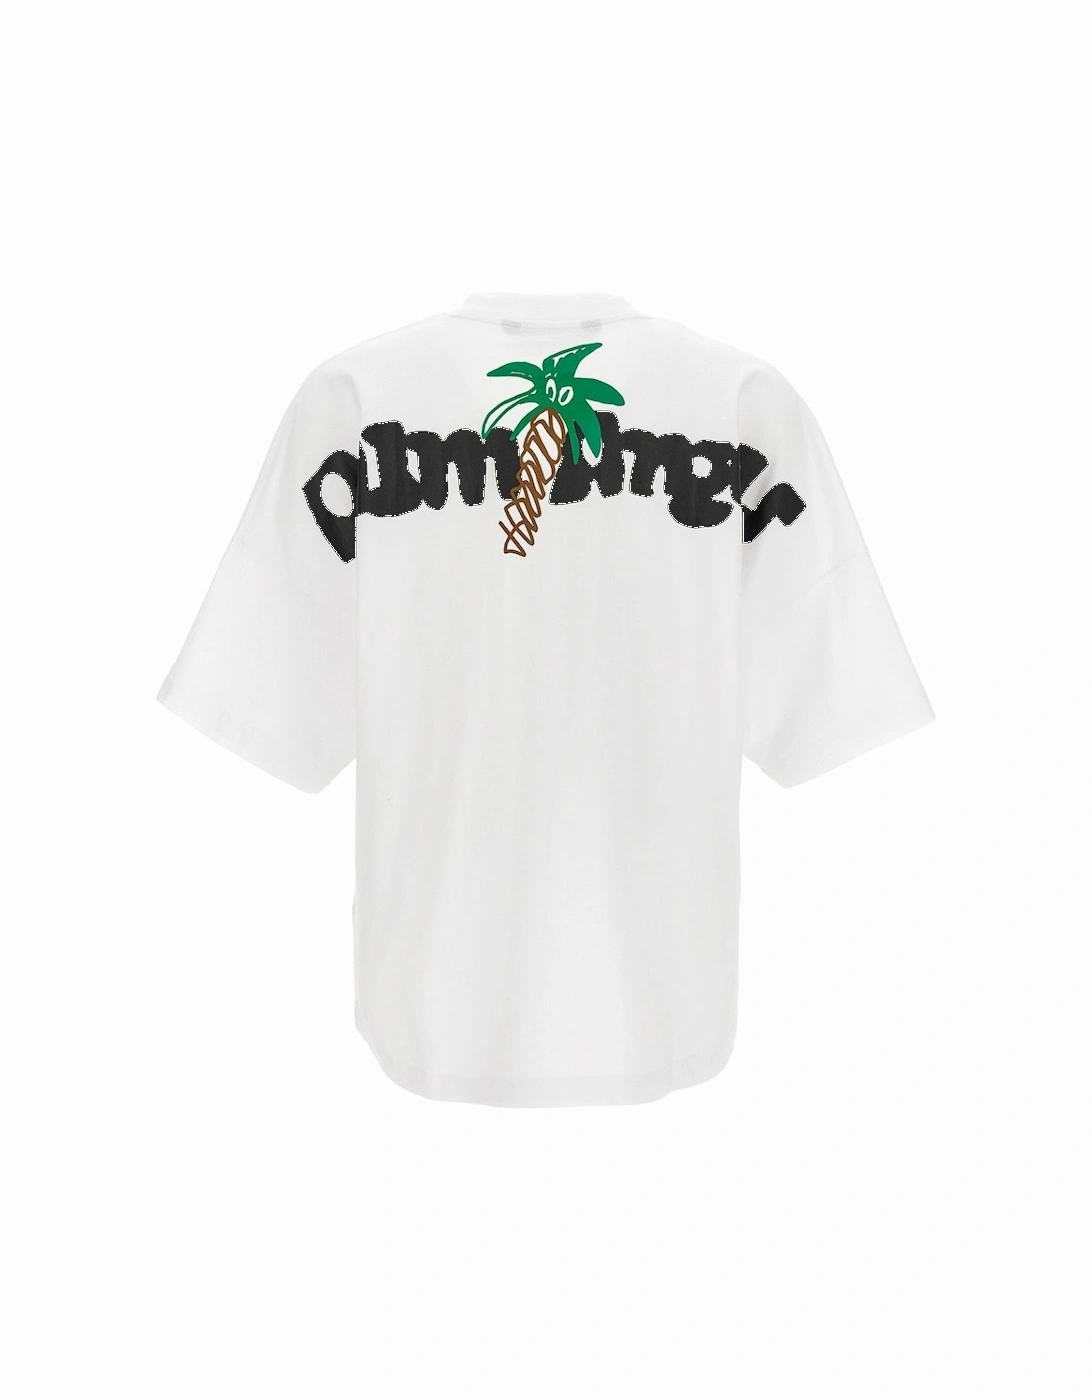 Sketchy Palm Tree Design Oversized Fit White T-Shirt